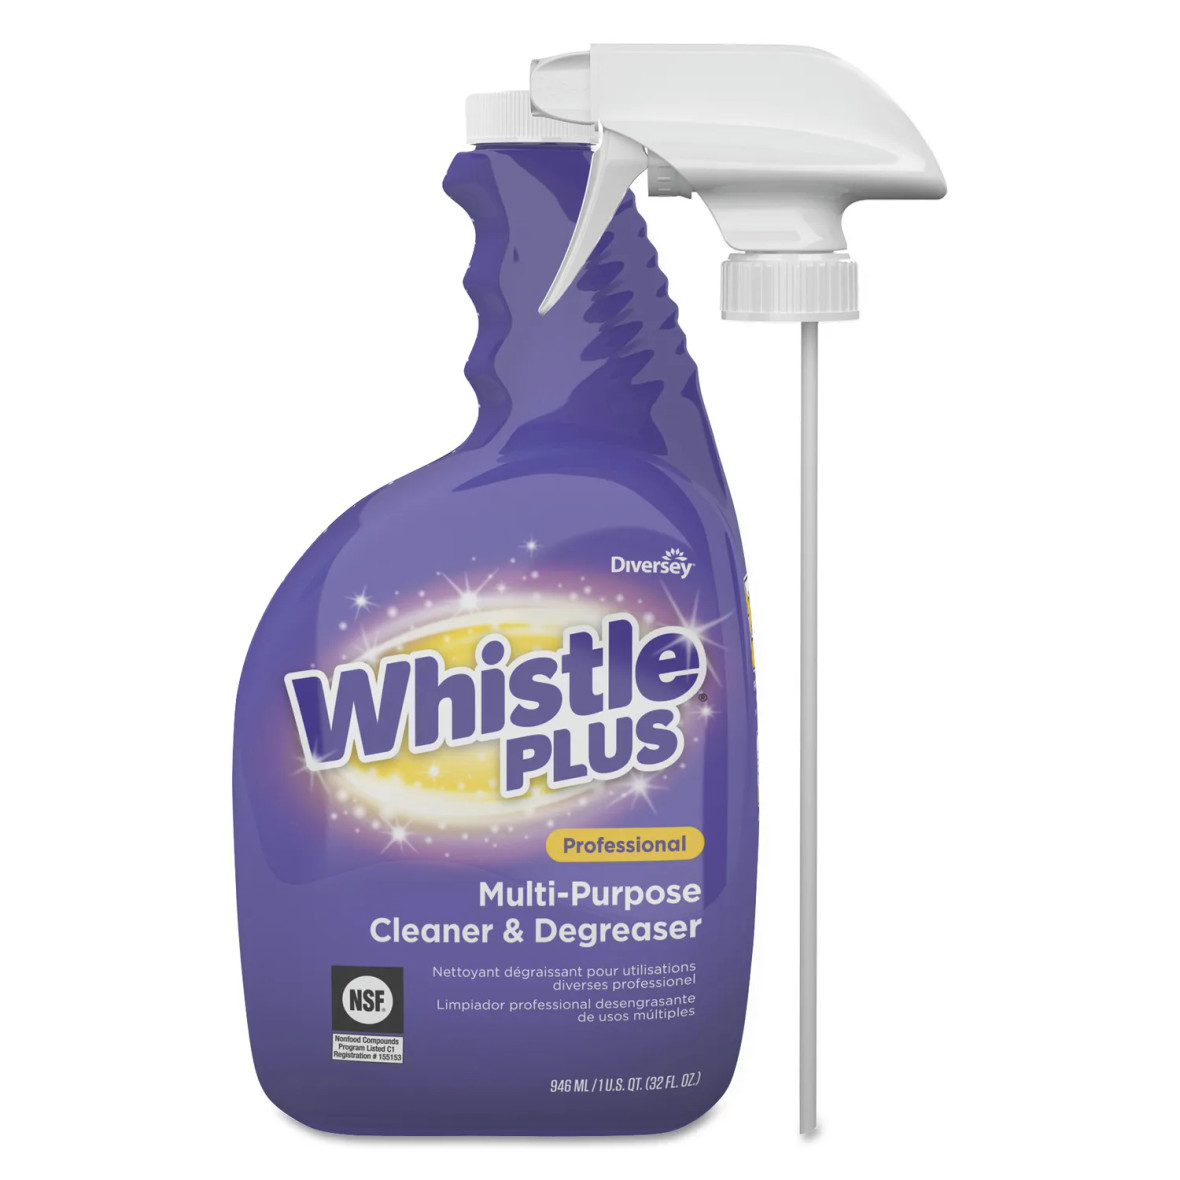 Diversey™ Whistle Plus Professional Multi-Purpose Cleaner/Degreaser